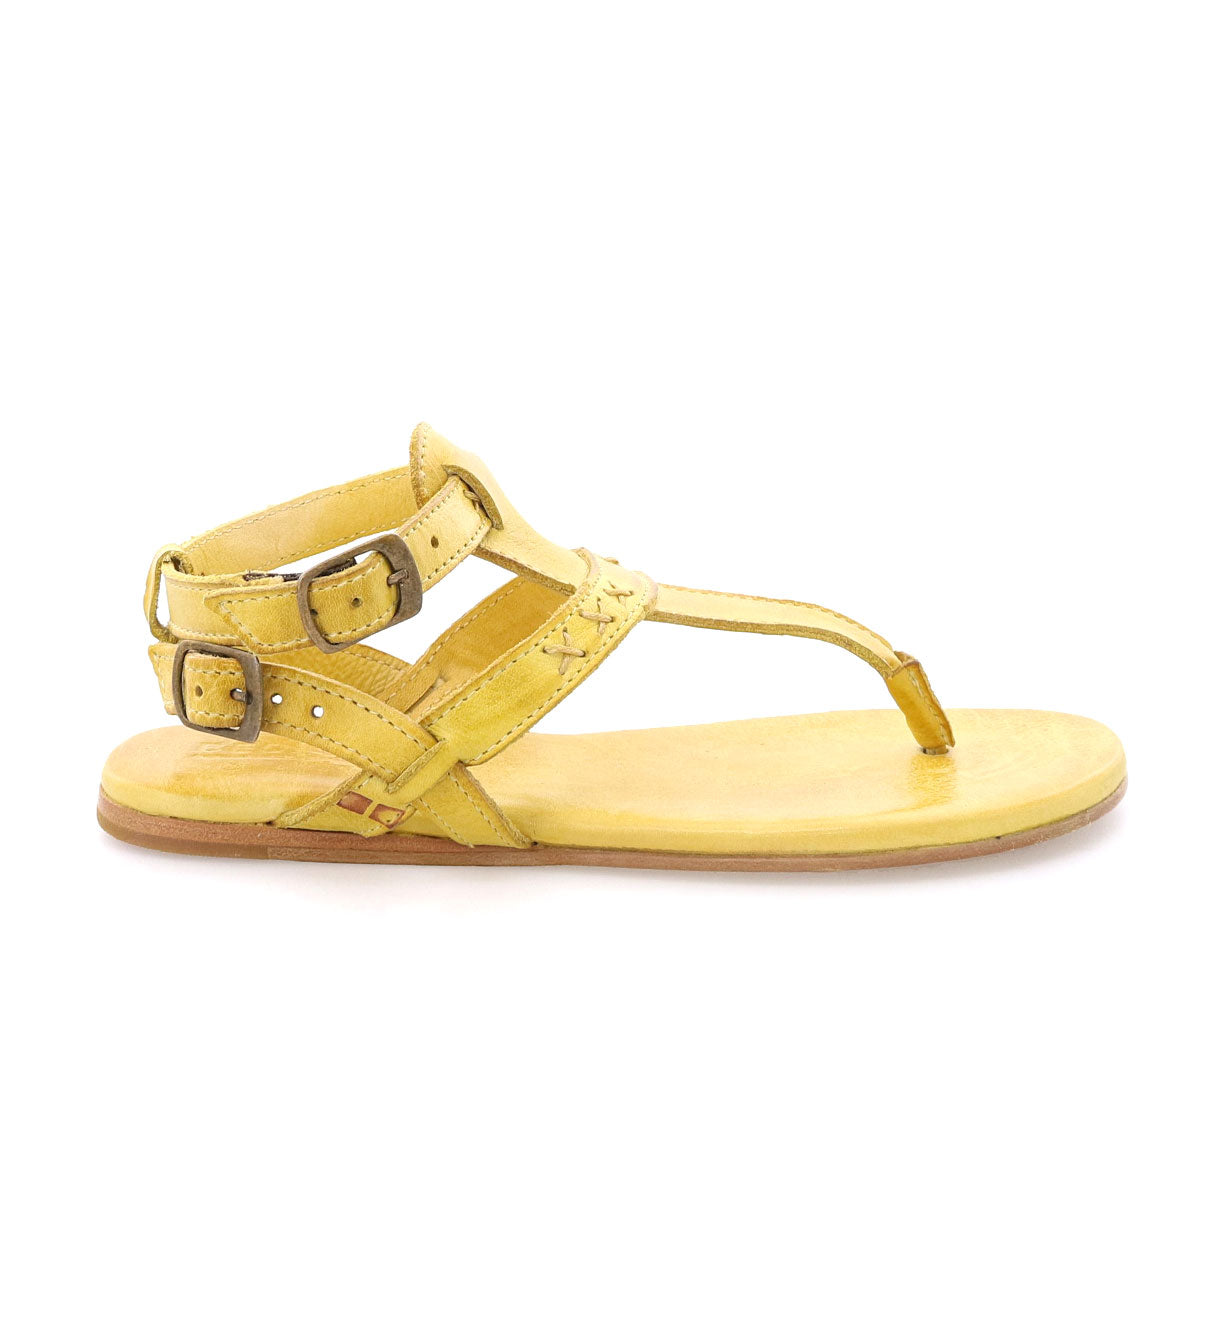 A pair of Moon yellow sandals with buckles and straps by Bed Stu.